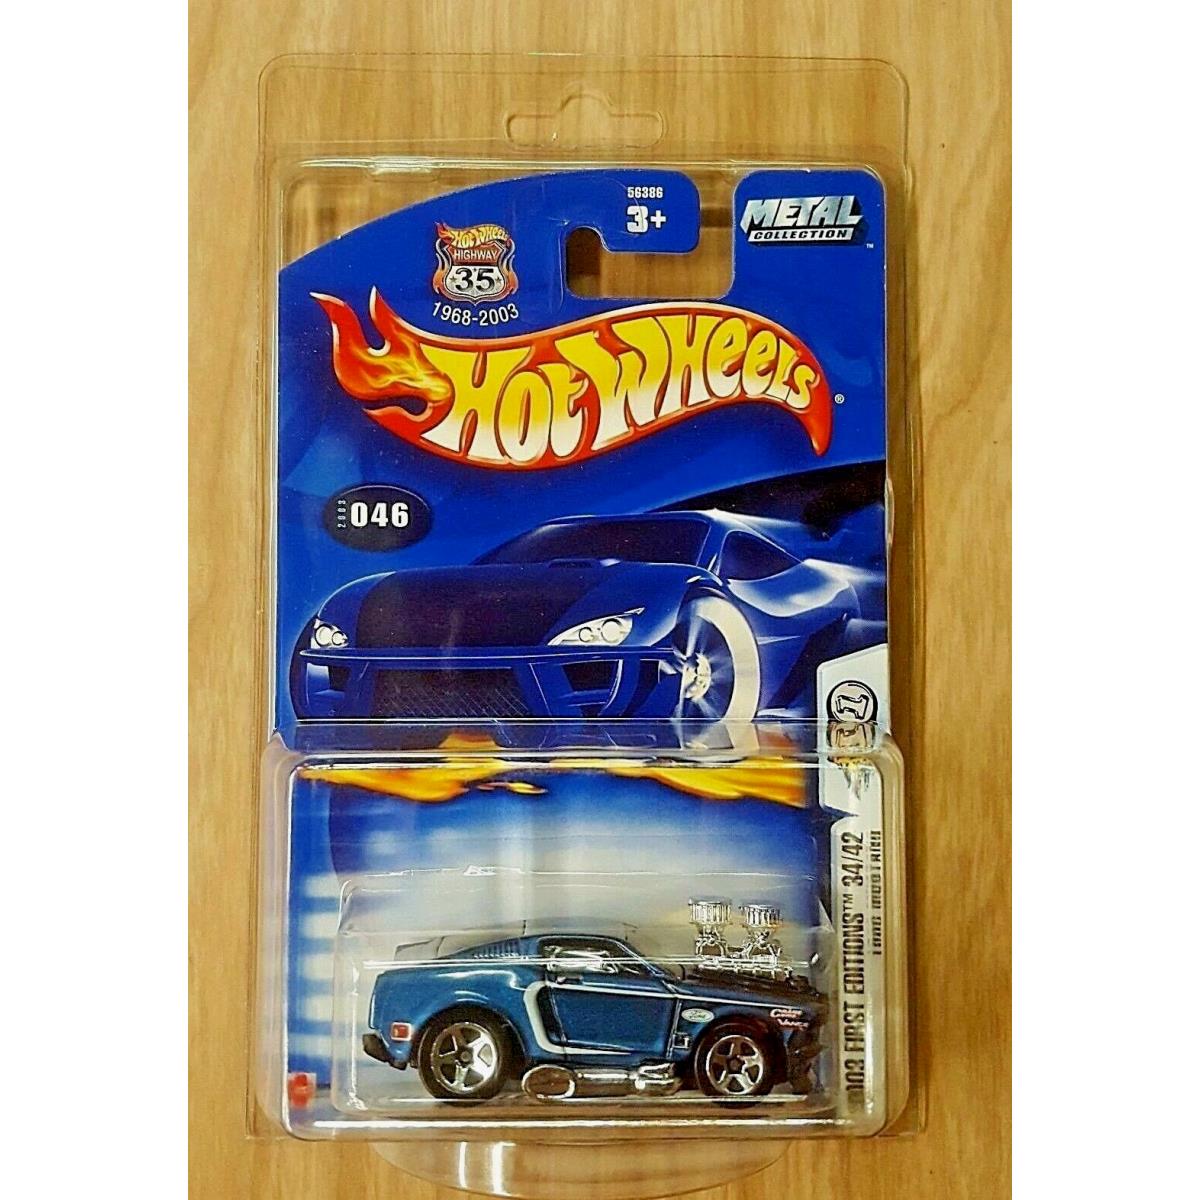 Hot Wheels 2003 First Edition 34 1968 Ford Mustang Vhtf W/protector Pack Mip